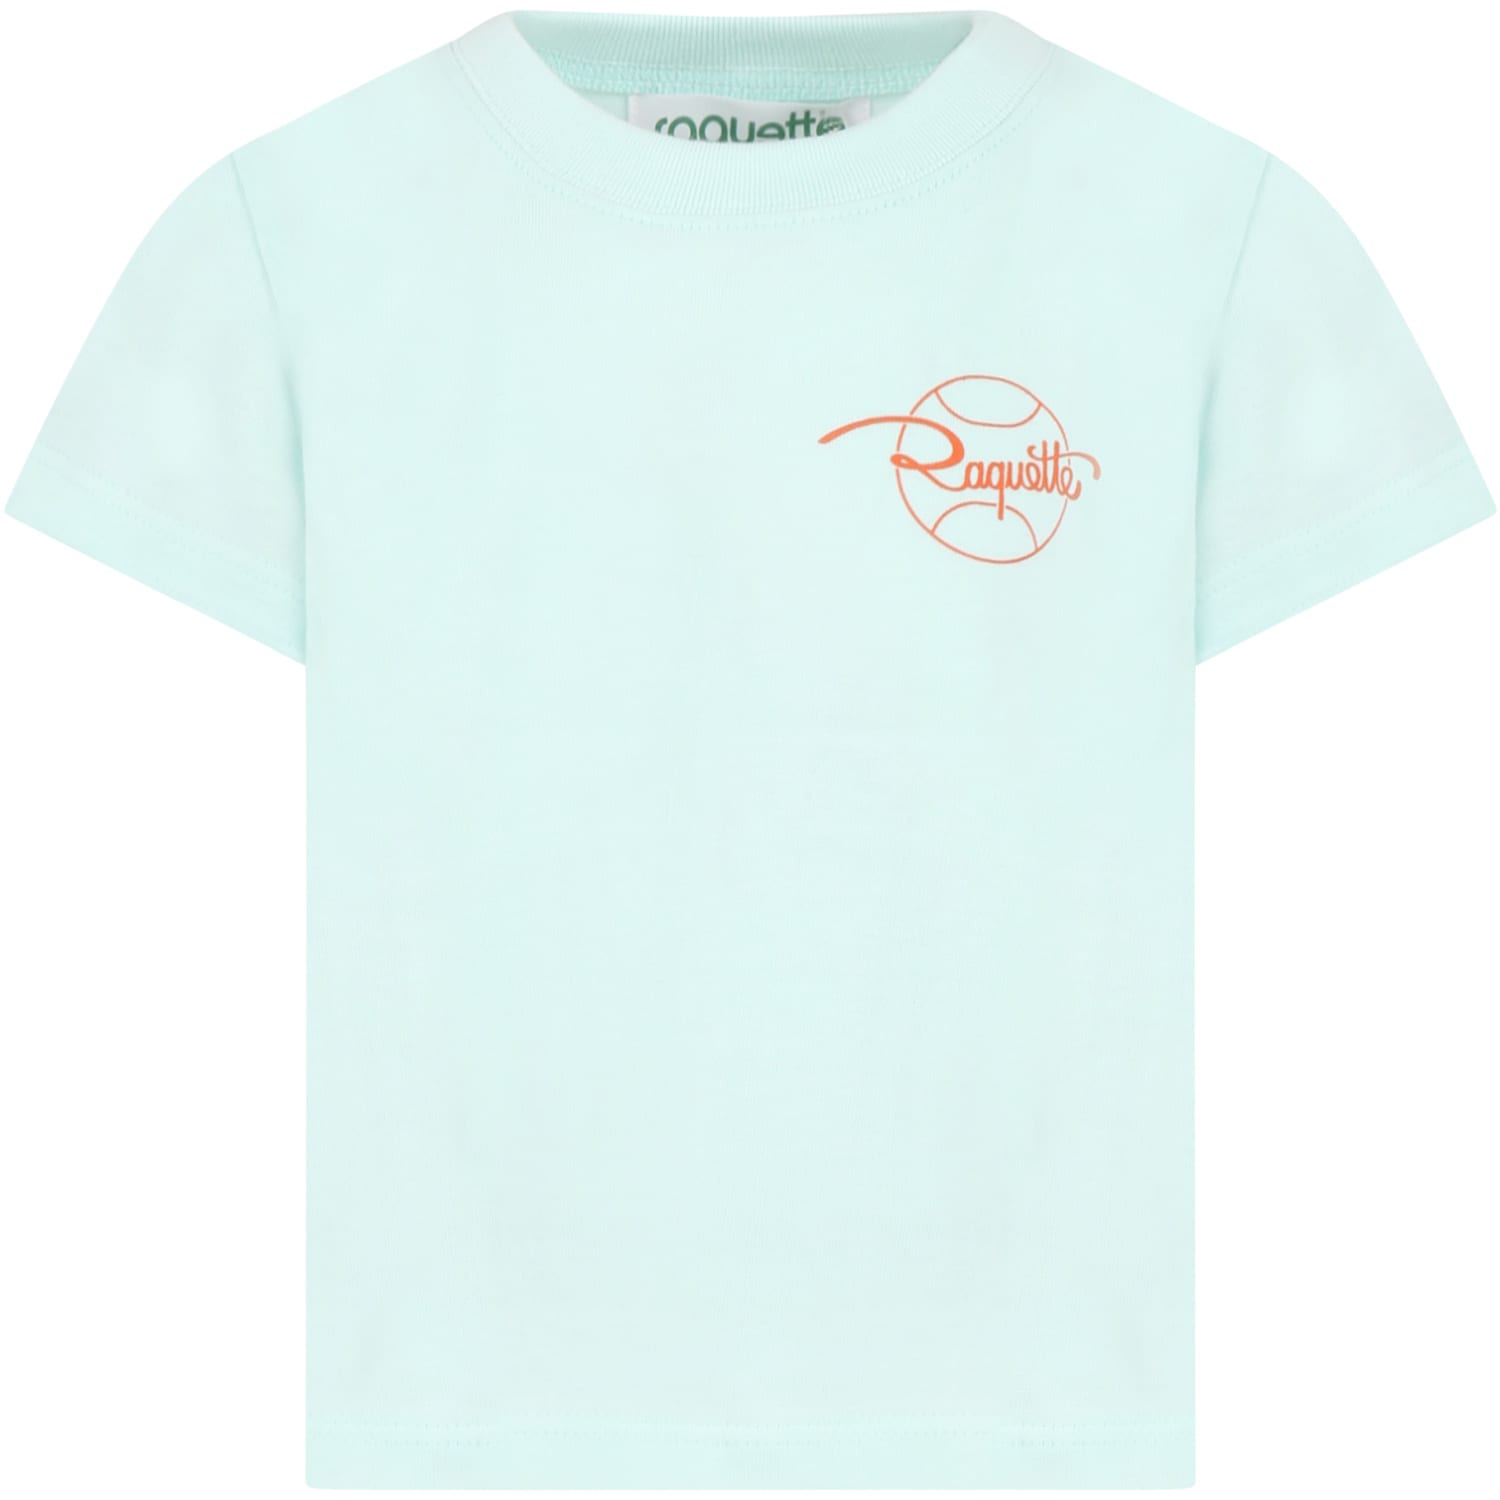 Raquette Teal Green T-shirt For Kids With Logo